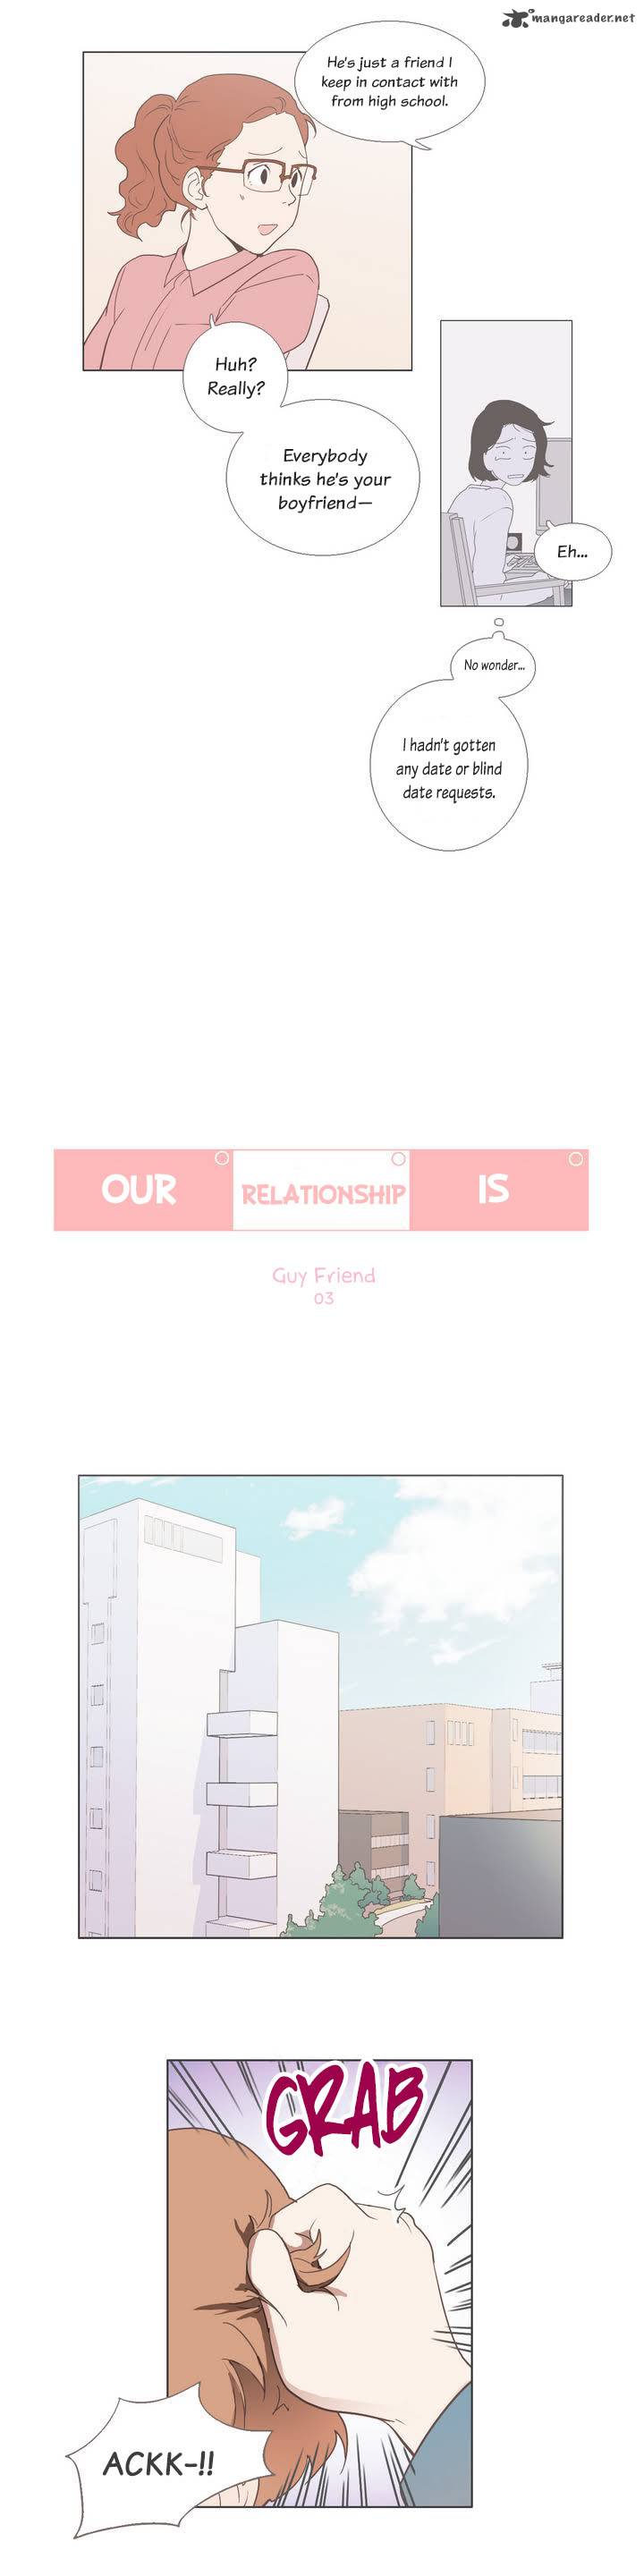 Our Relationship Is Chapter 3 Page 3